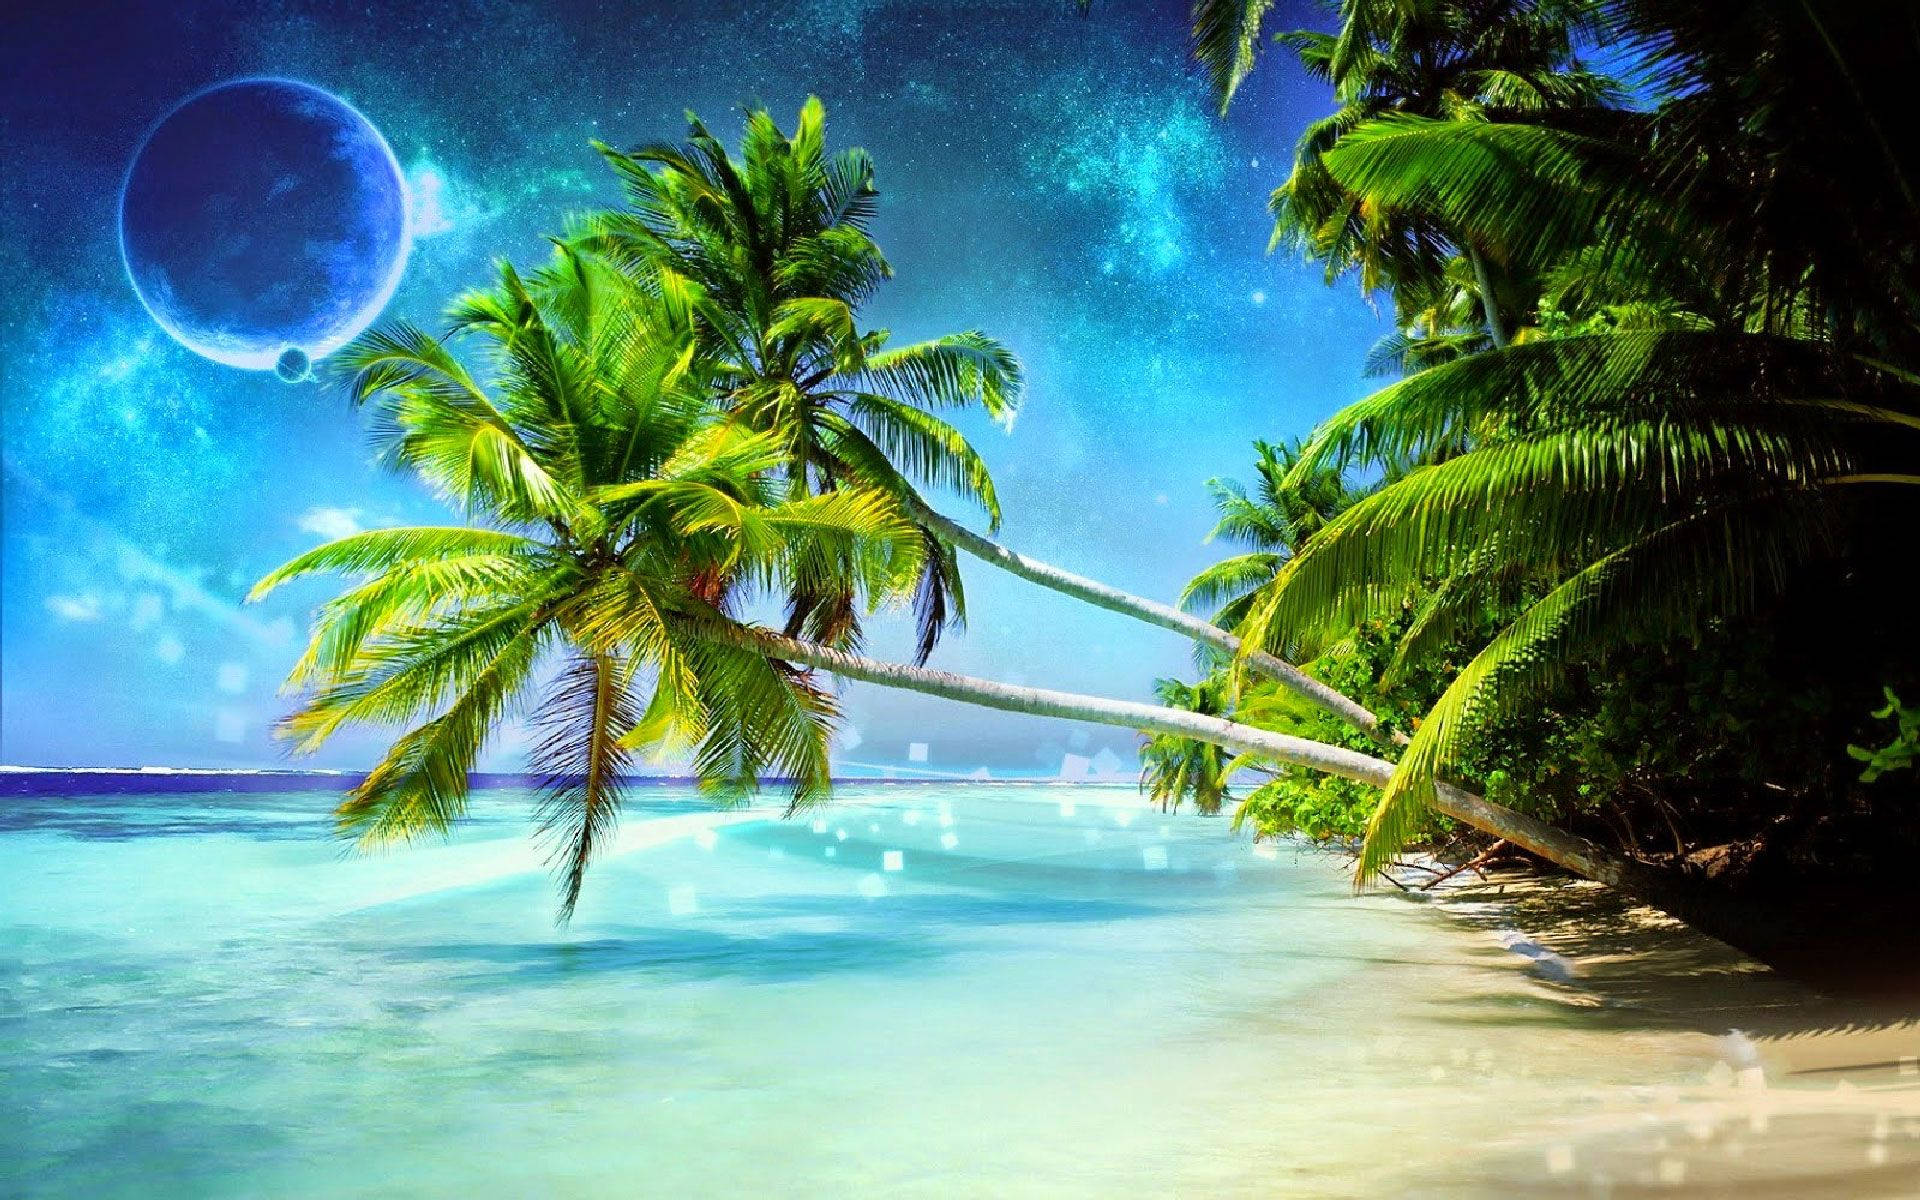 Download 3d Coconut Trees On The Beach Wallpaper 